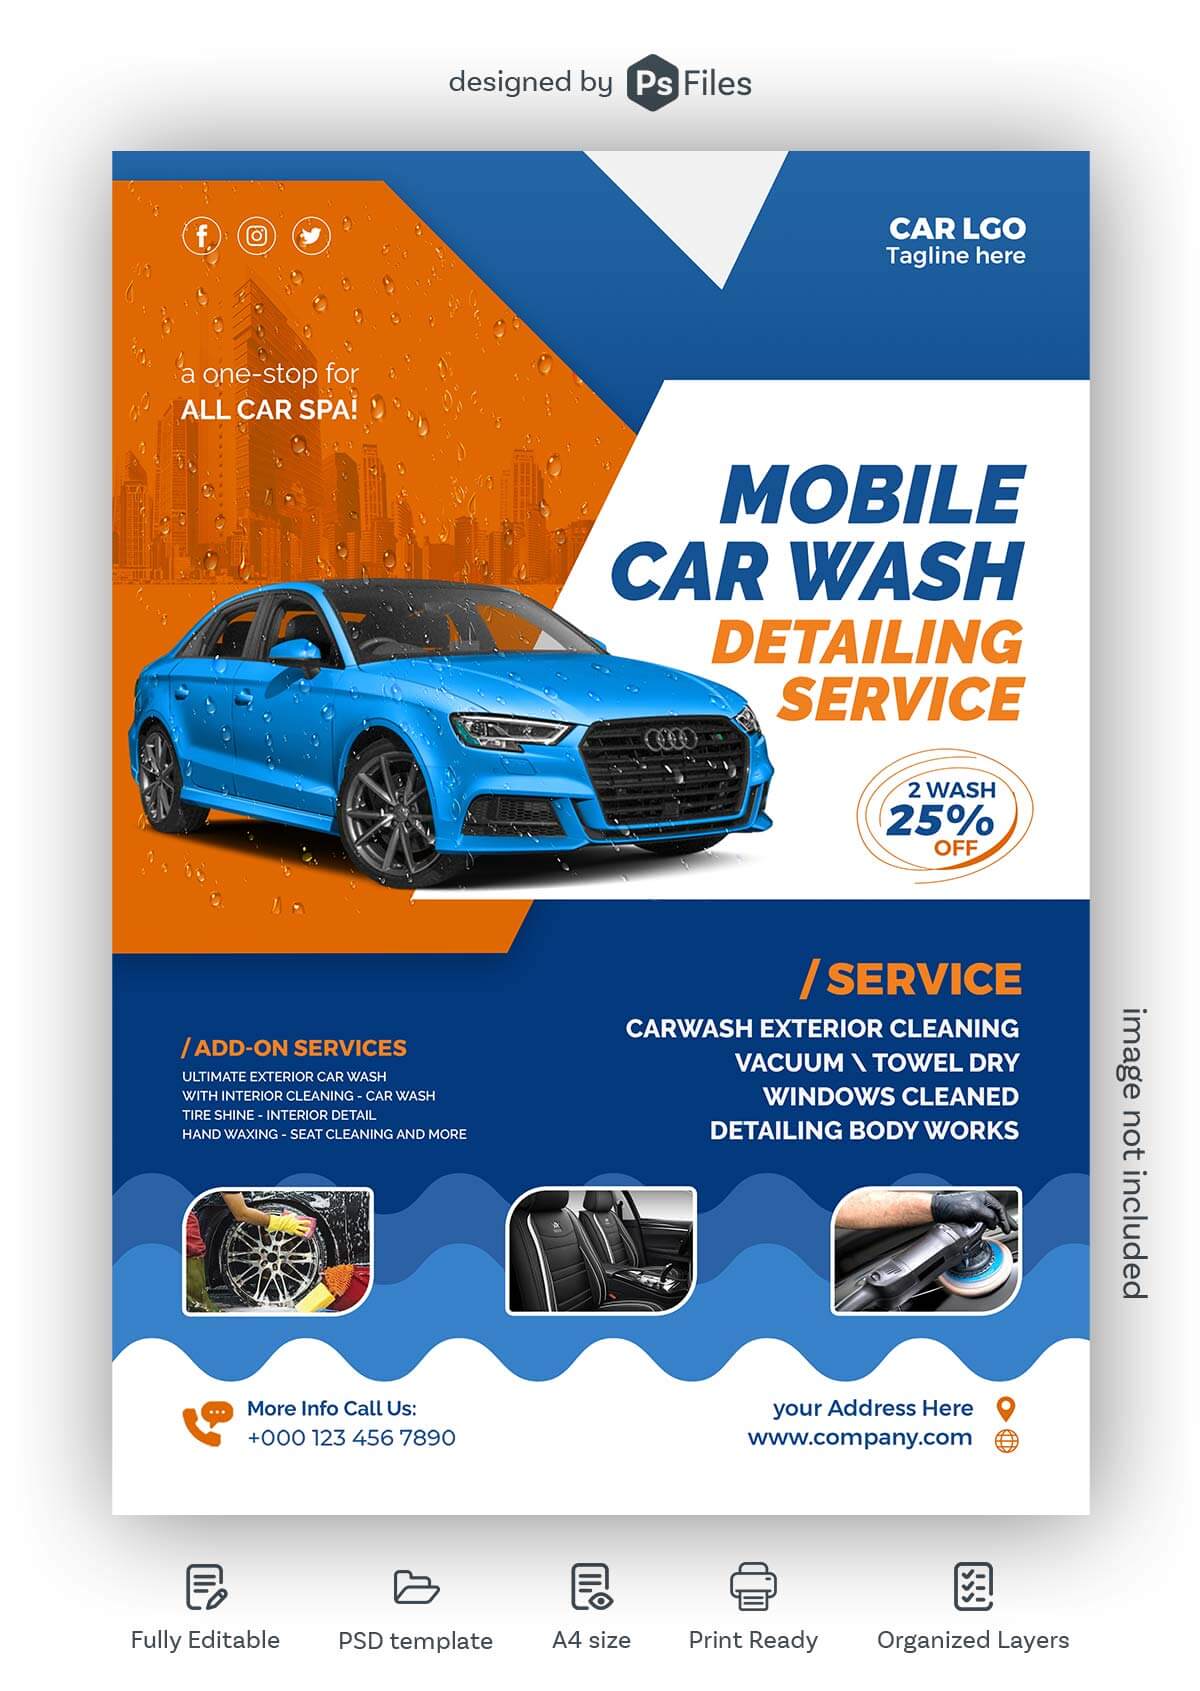 car-wash-services-promotional-flyer-psd-template-download